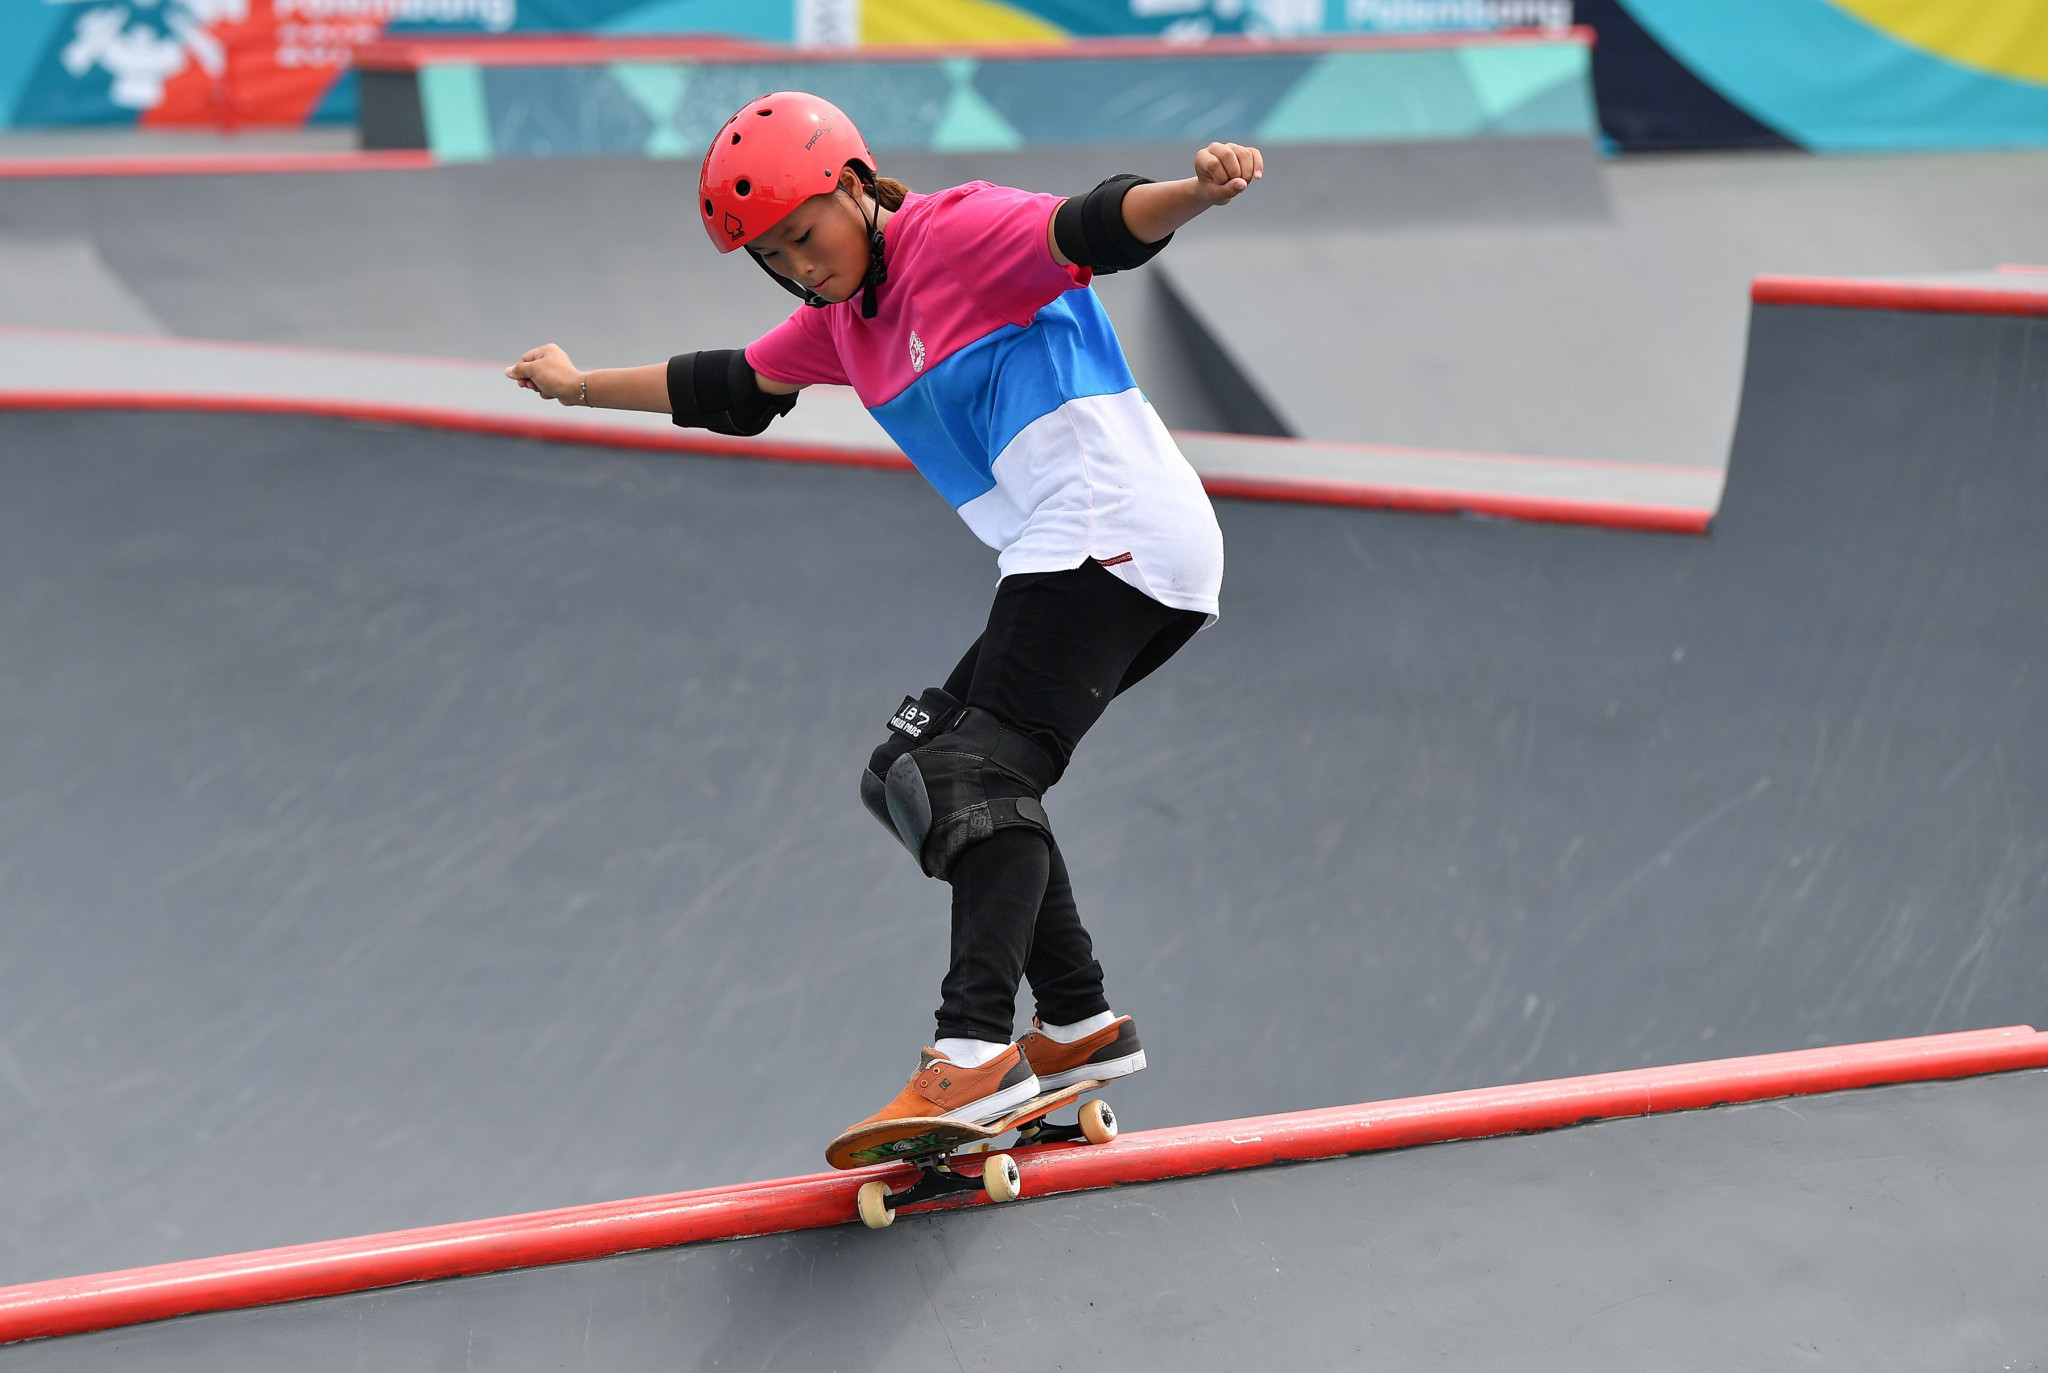 Youngsters make their mark in skateboarding as China pass 100-gold-medals mark on day 11 of 2018 Asian Games